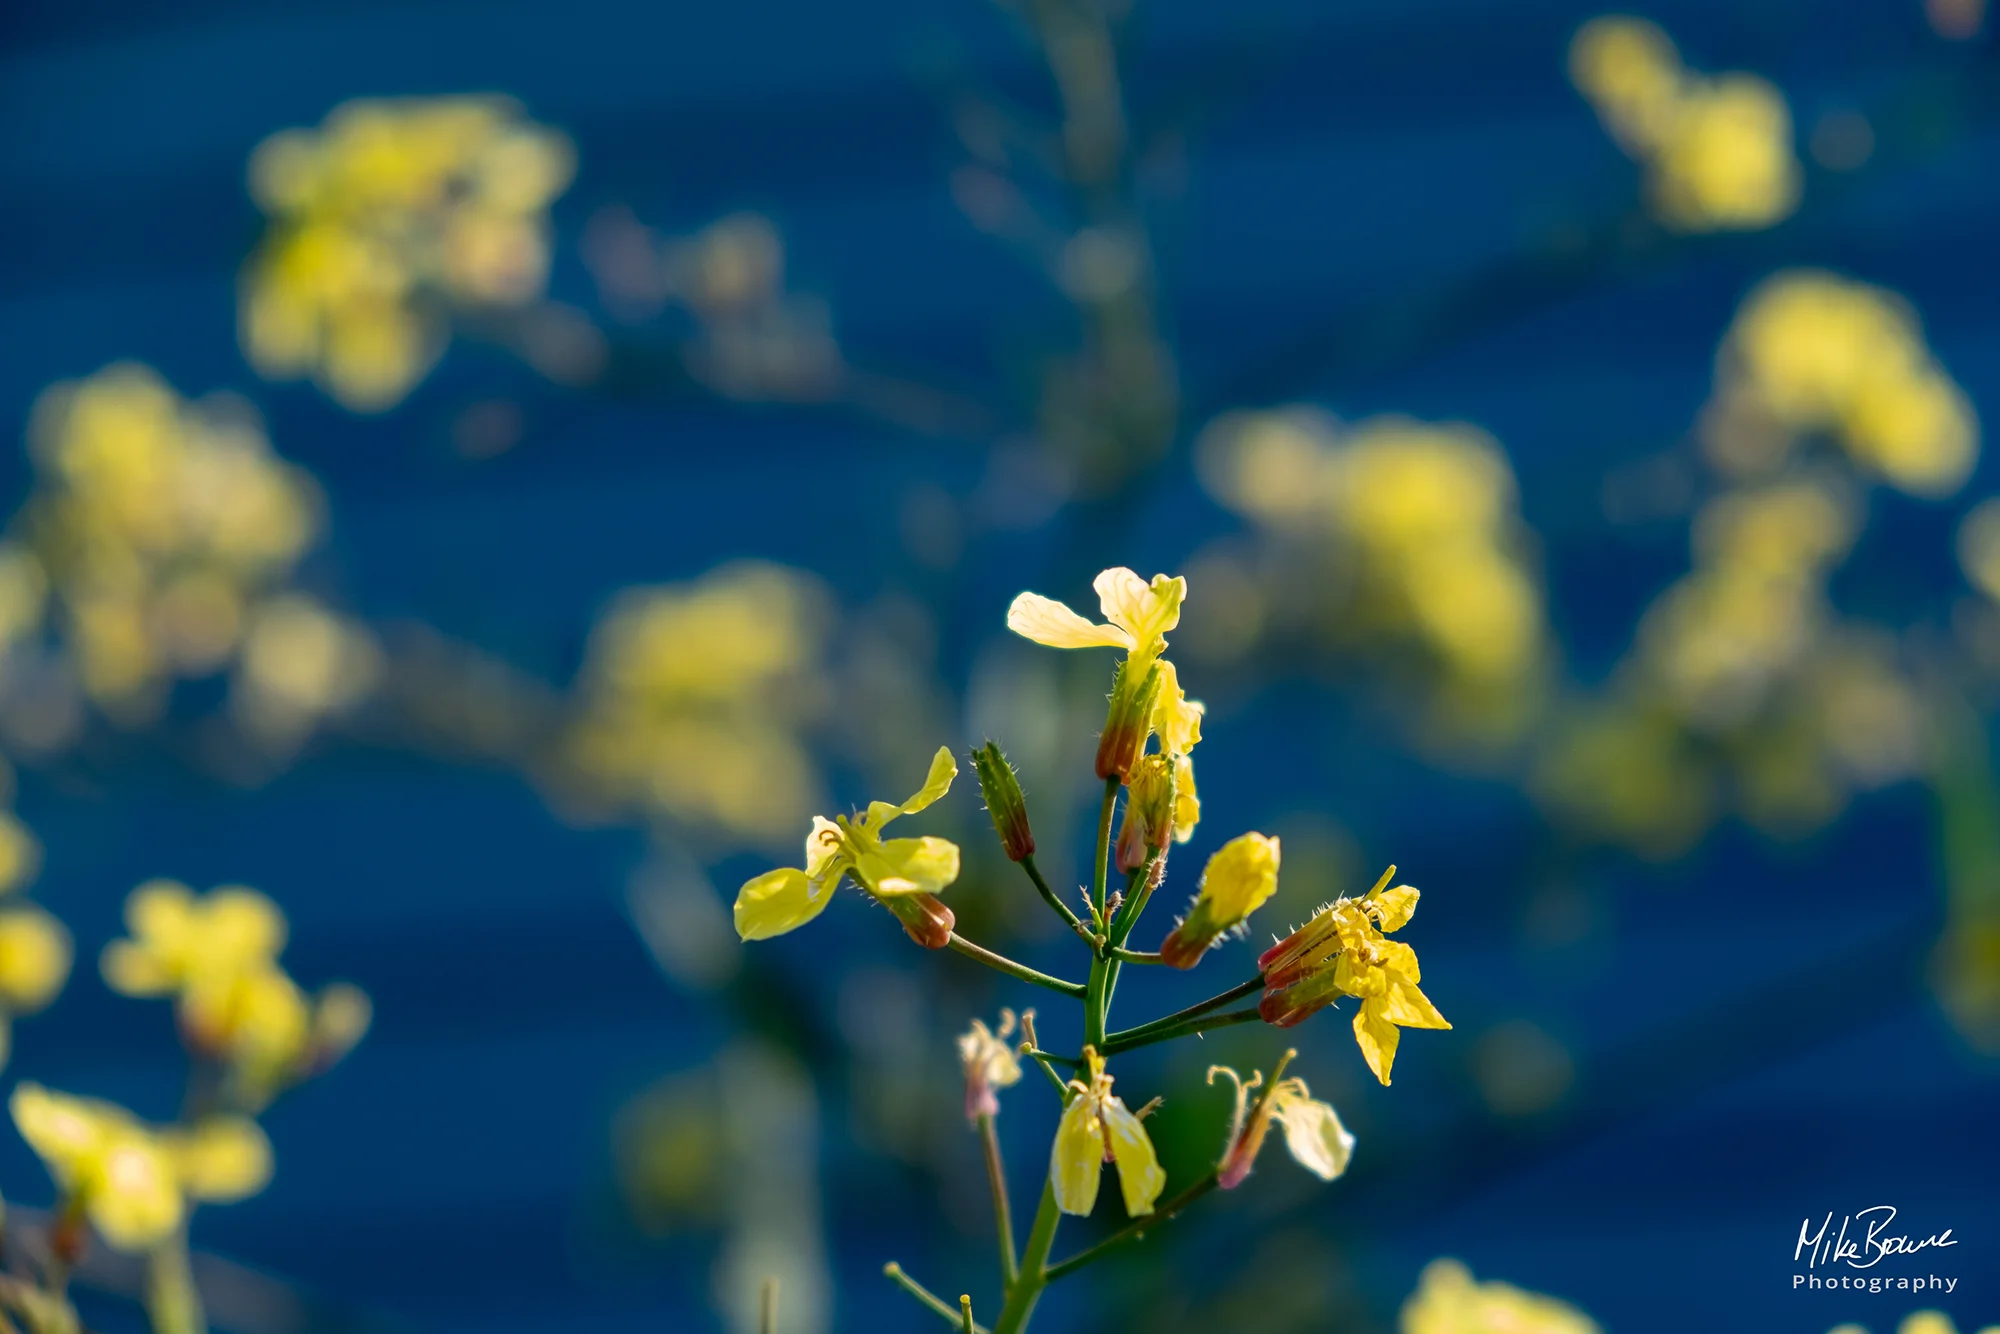 Bright yellow flowers in front of a dark blue wall